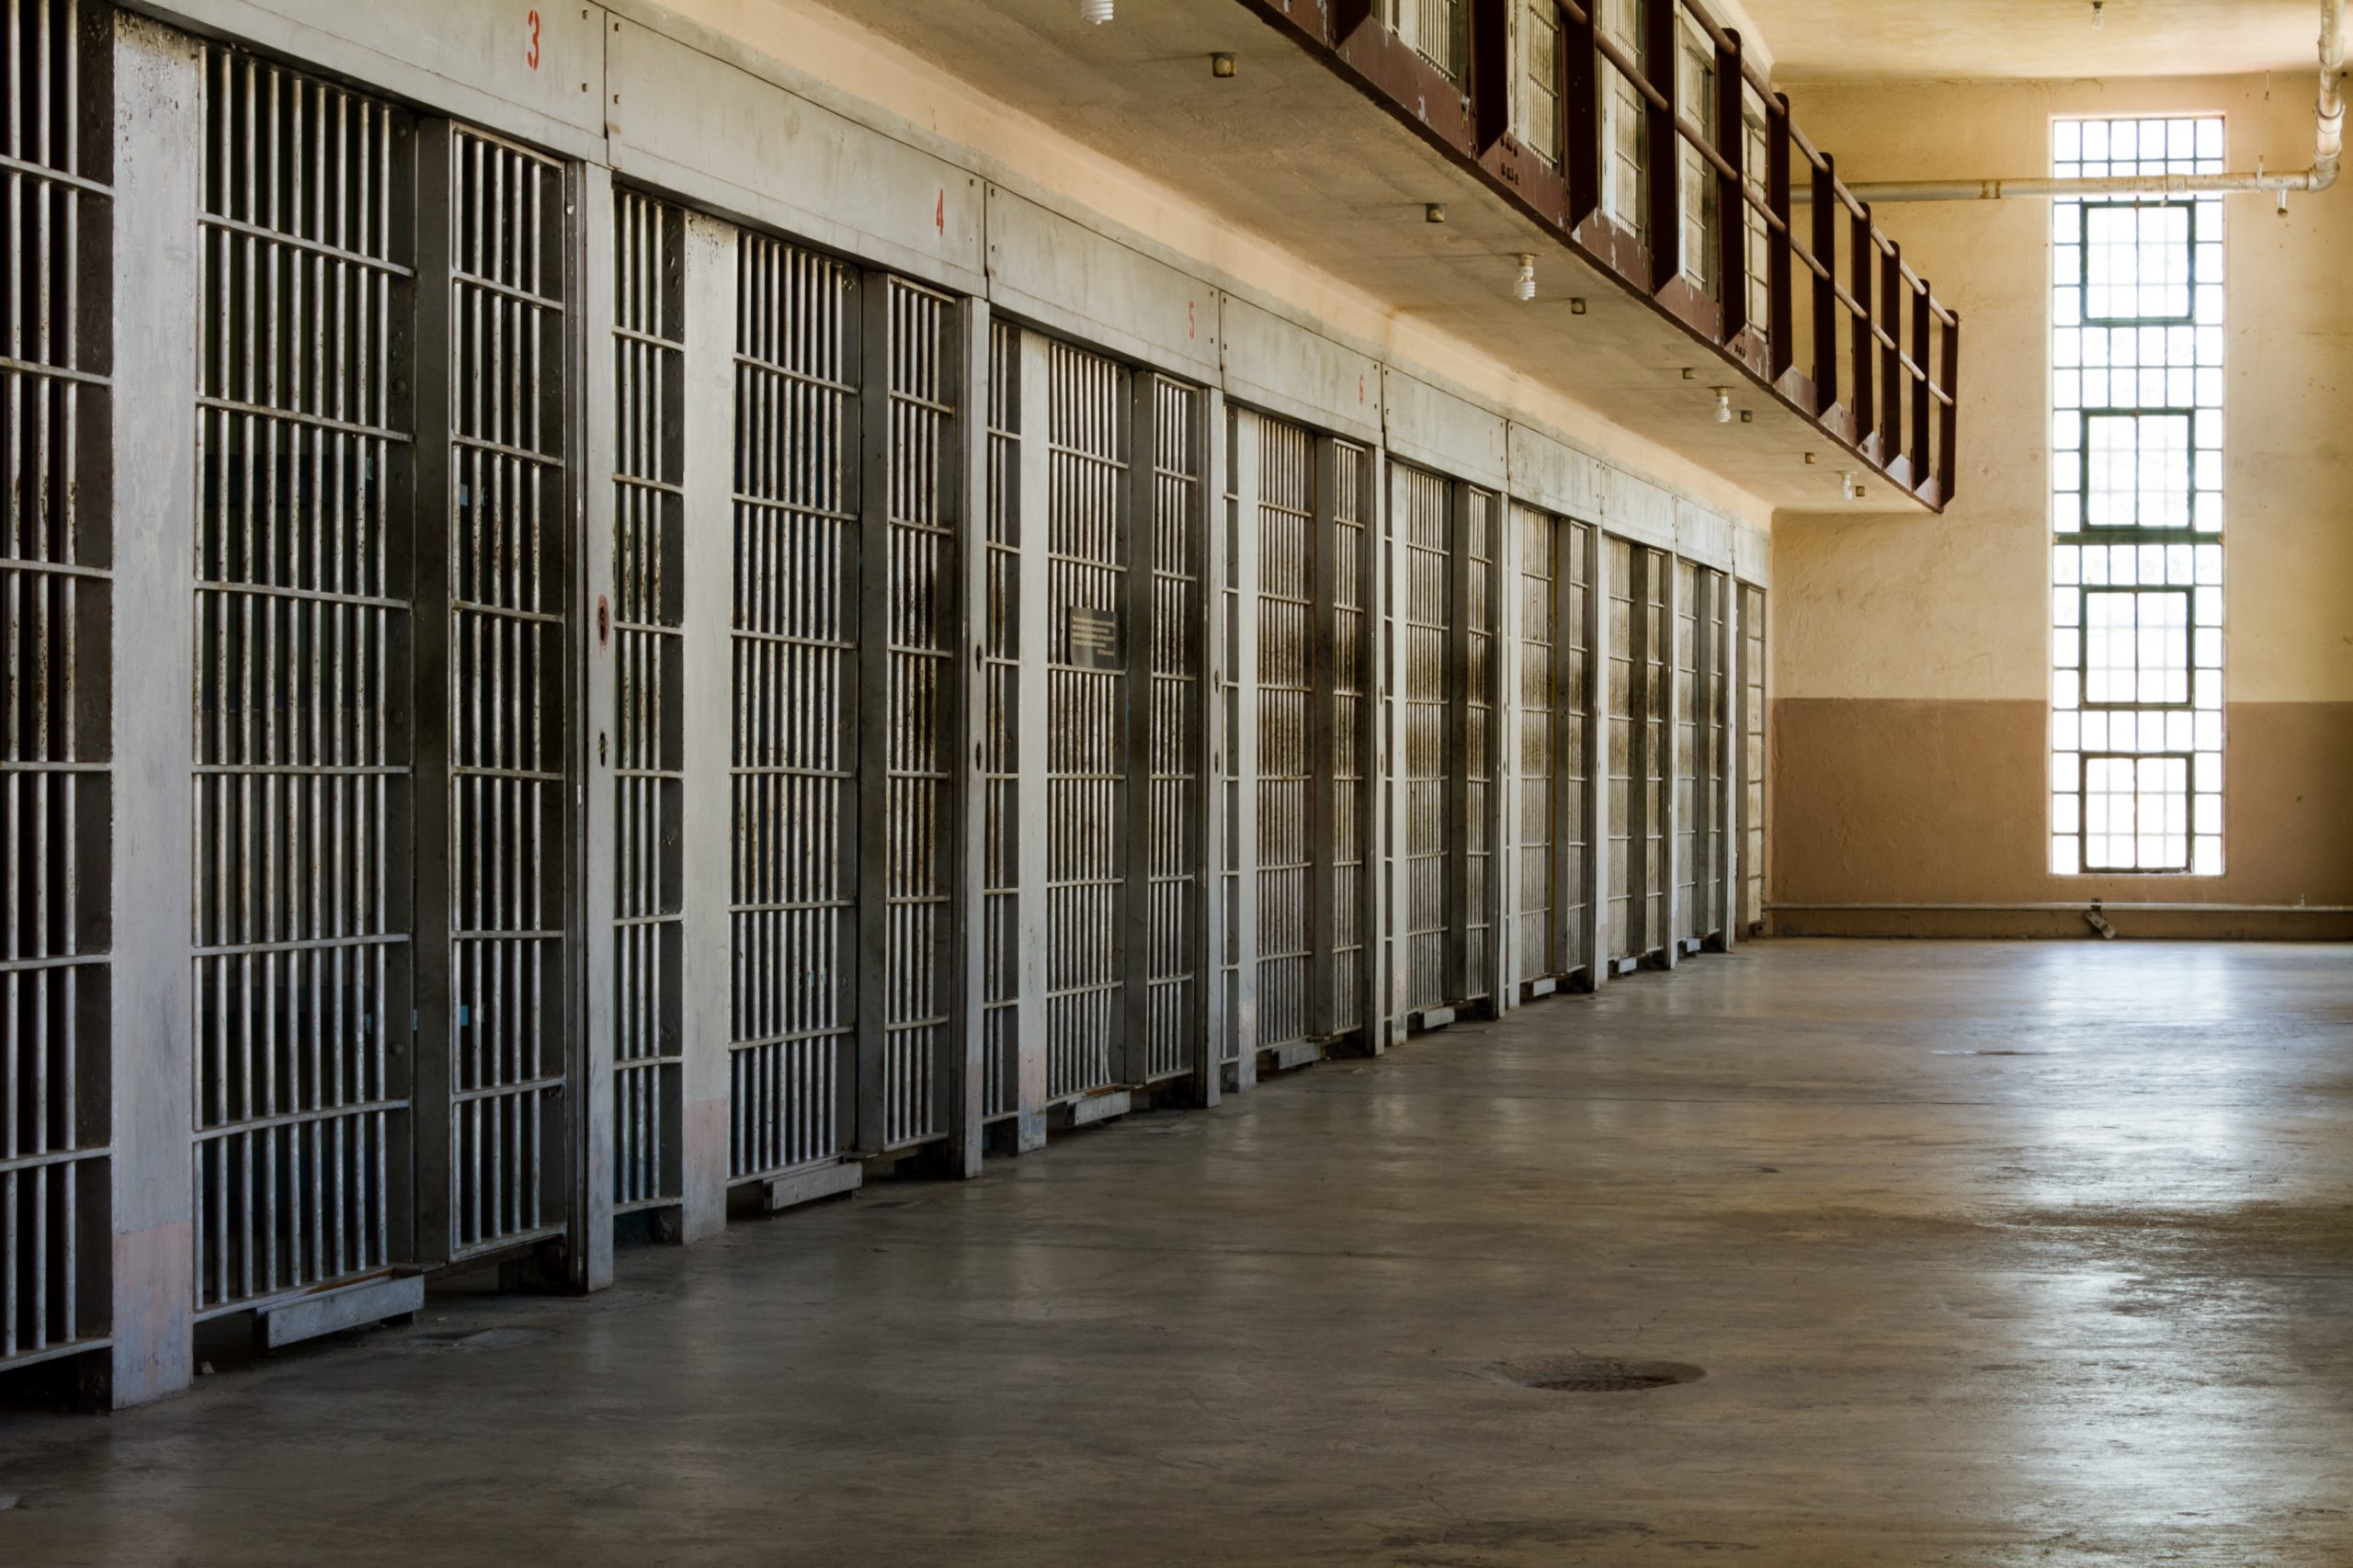 Can an Incarcerated Person Sue a Corrections Officer?